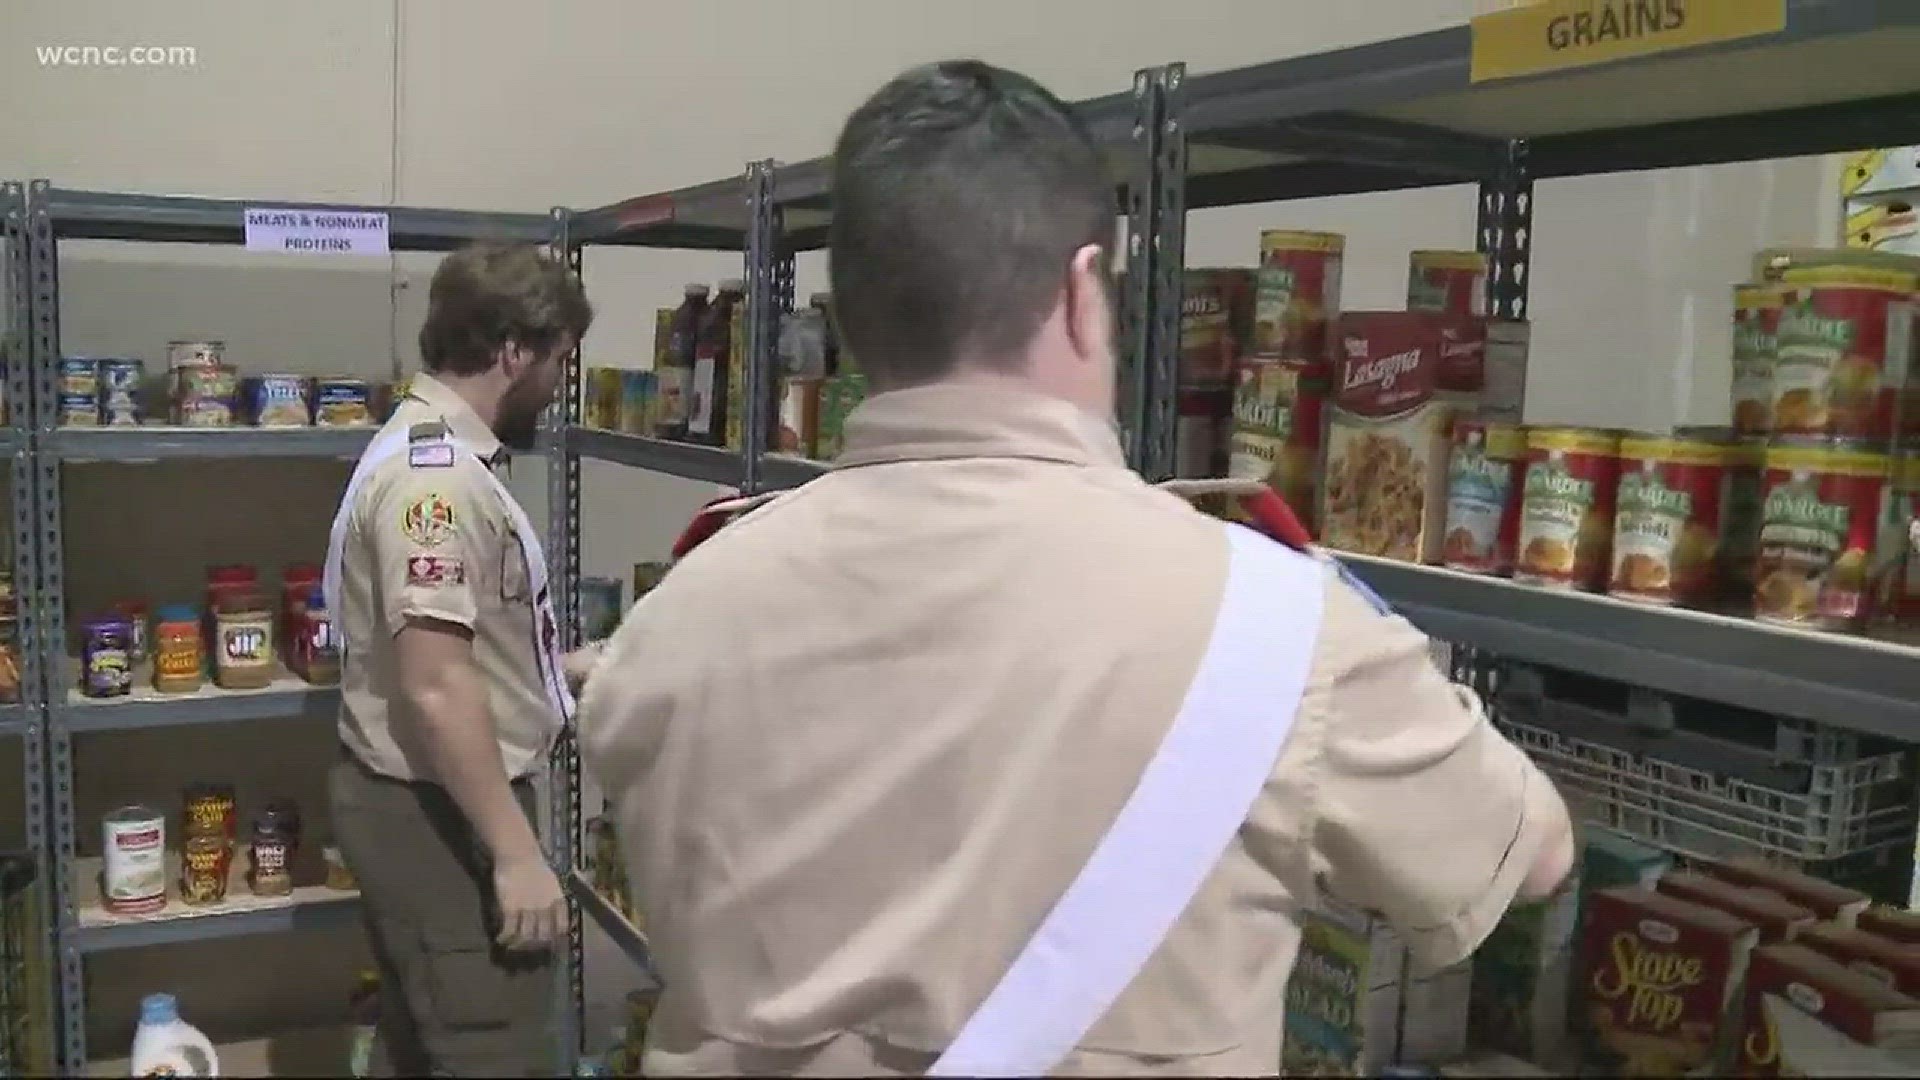 Saturday scouts will collect donations for loaves & fishes